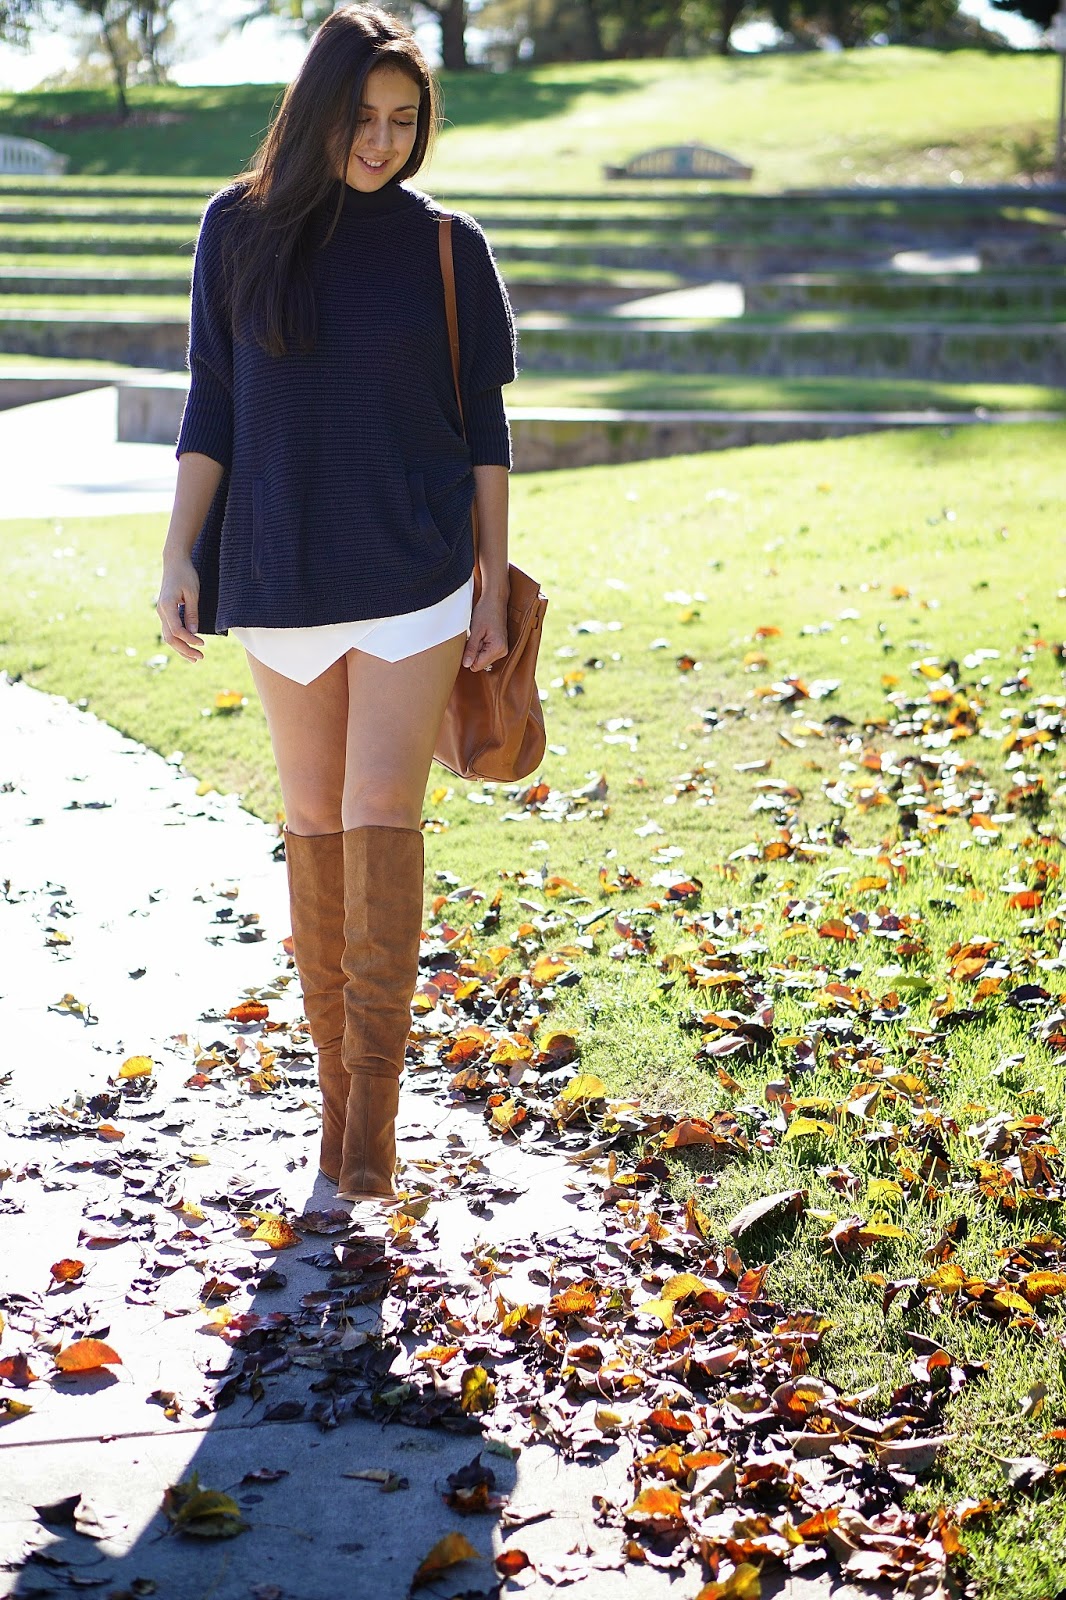 Zara High Heeled Leather Boot, Zara Camel Colored Knee High Boot, Light Brown Boots, Forever 21 White Skort, White Skort, Hermes Inspired Bag, Oversized Navy Sweater, H&M Navy Sweater, How To Wear Knee High Boots With A Skirt